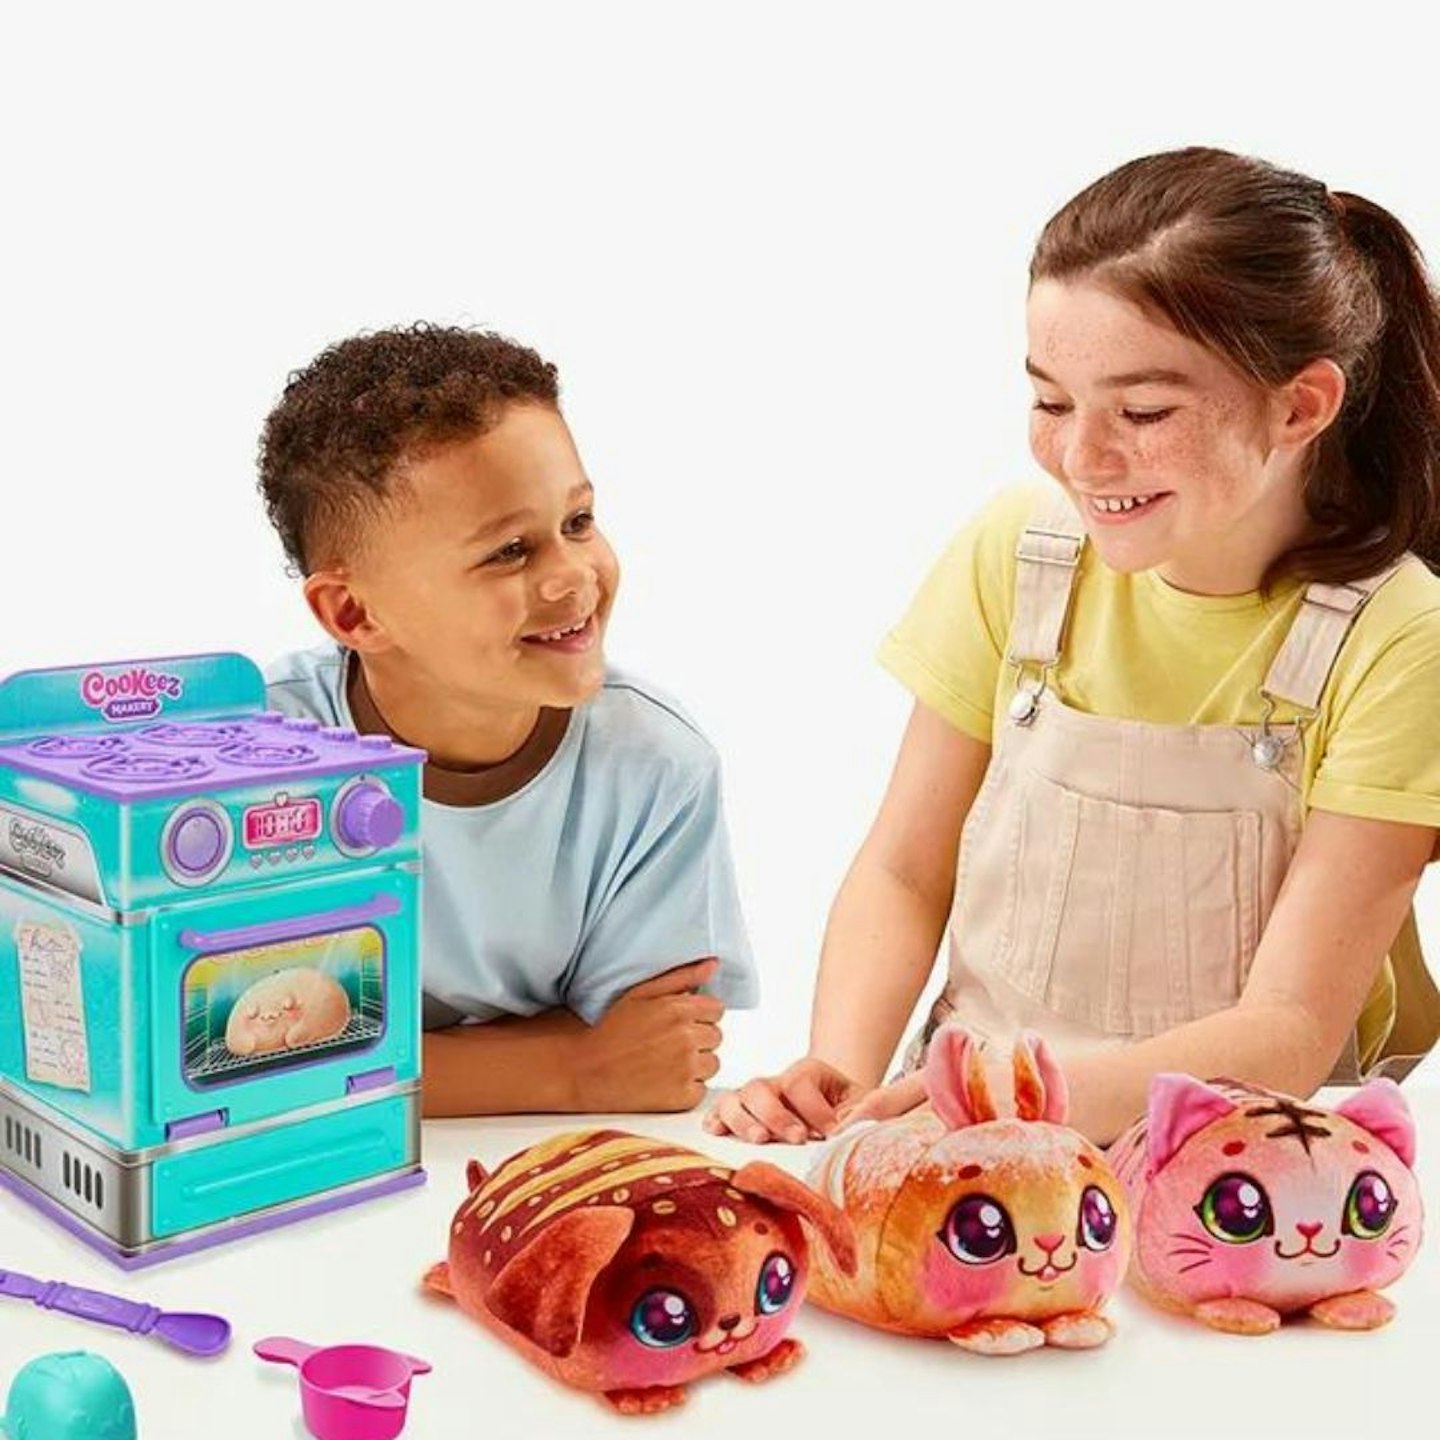  Best Christmas Gifts For Kids: Cookeez Makery Baked Treatz Oven Playset